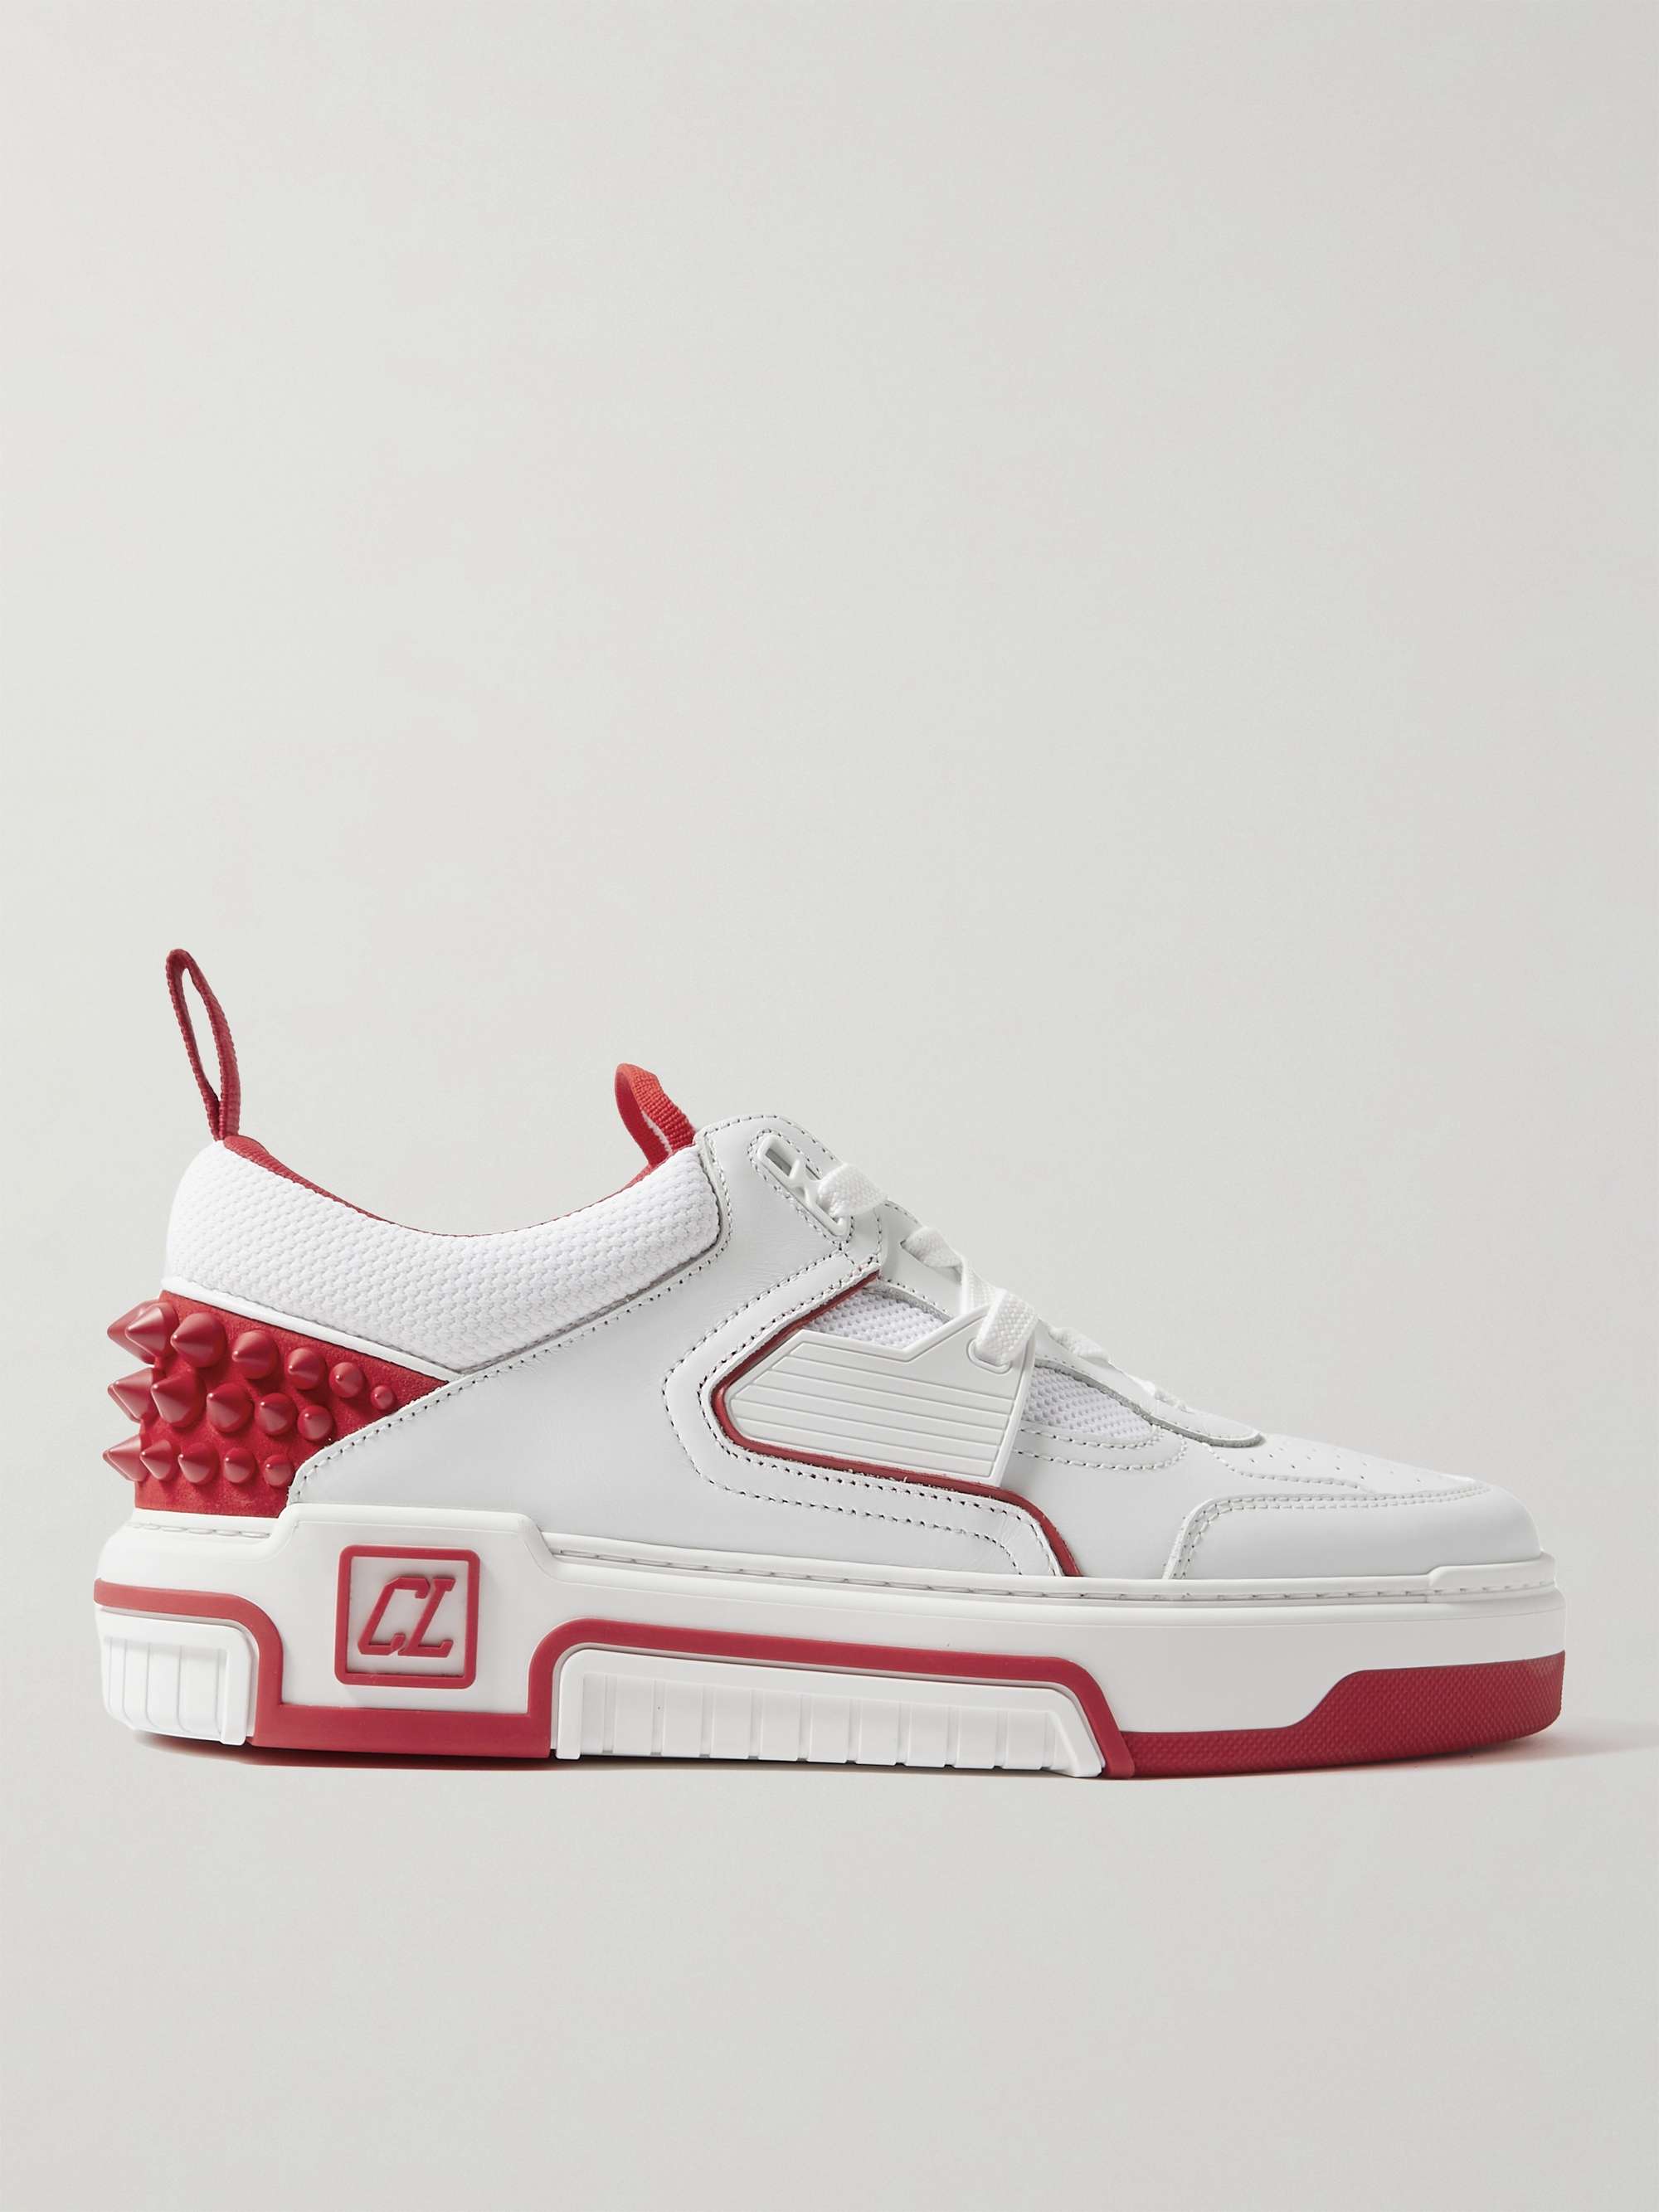 Christian Louboutin Astroloubi Spiked Leather and Mesh Sneakers